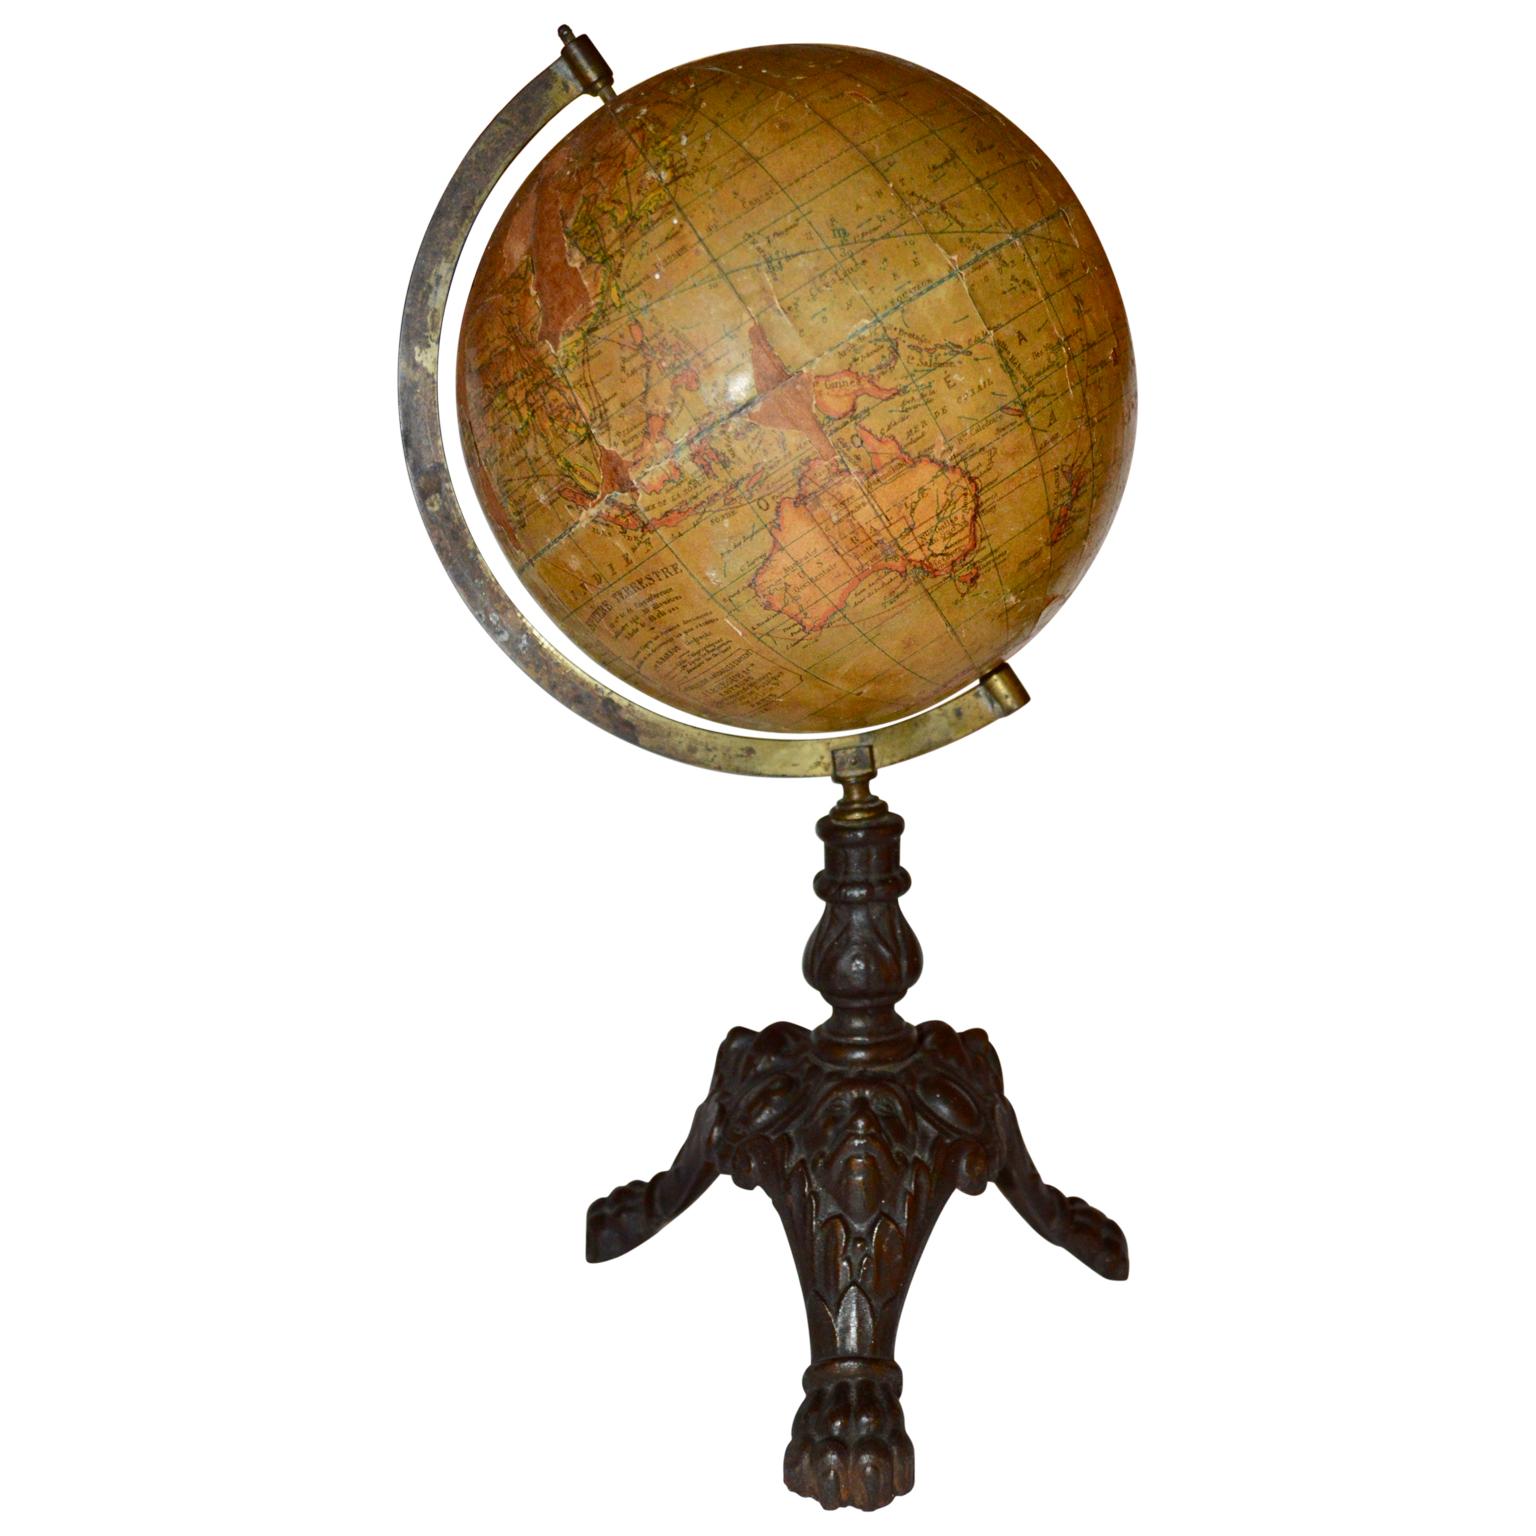 Late 19th. century or early 20th century papier-mache terrestrial globe by J. Lebeque et Cie, 30 rue de Lille, in Paris. It has a cast iron paw feet.